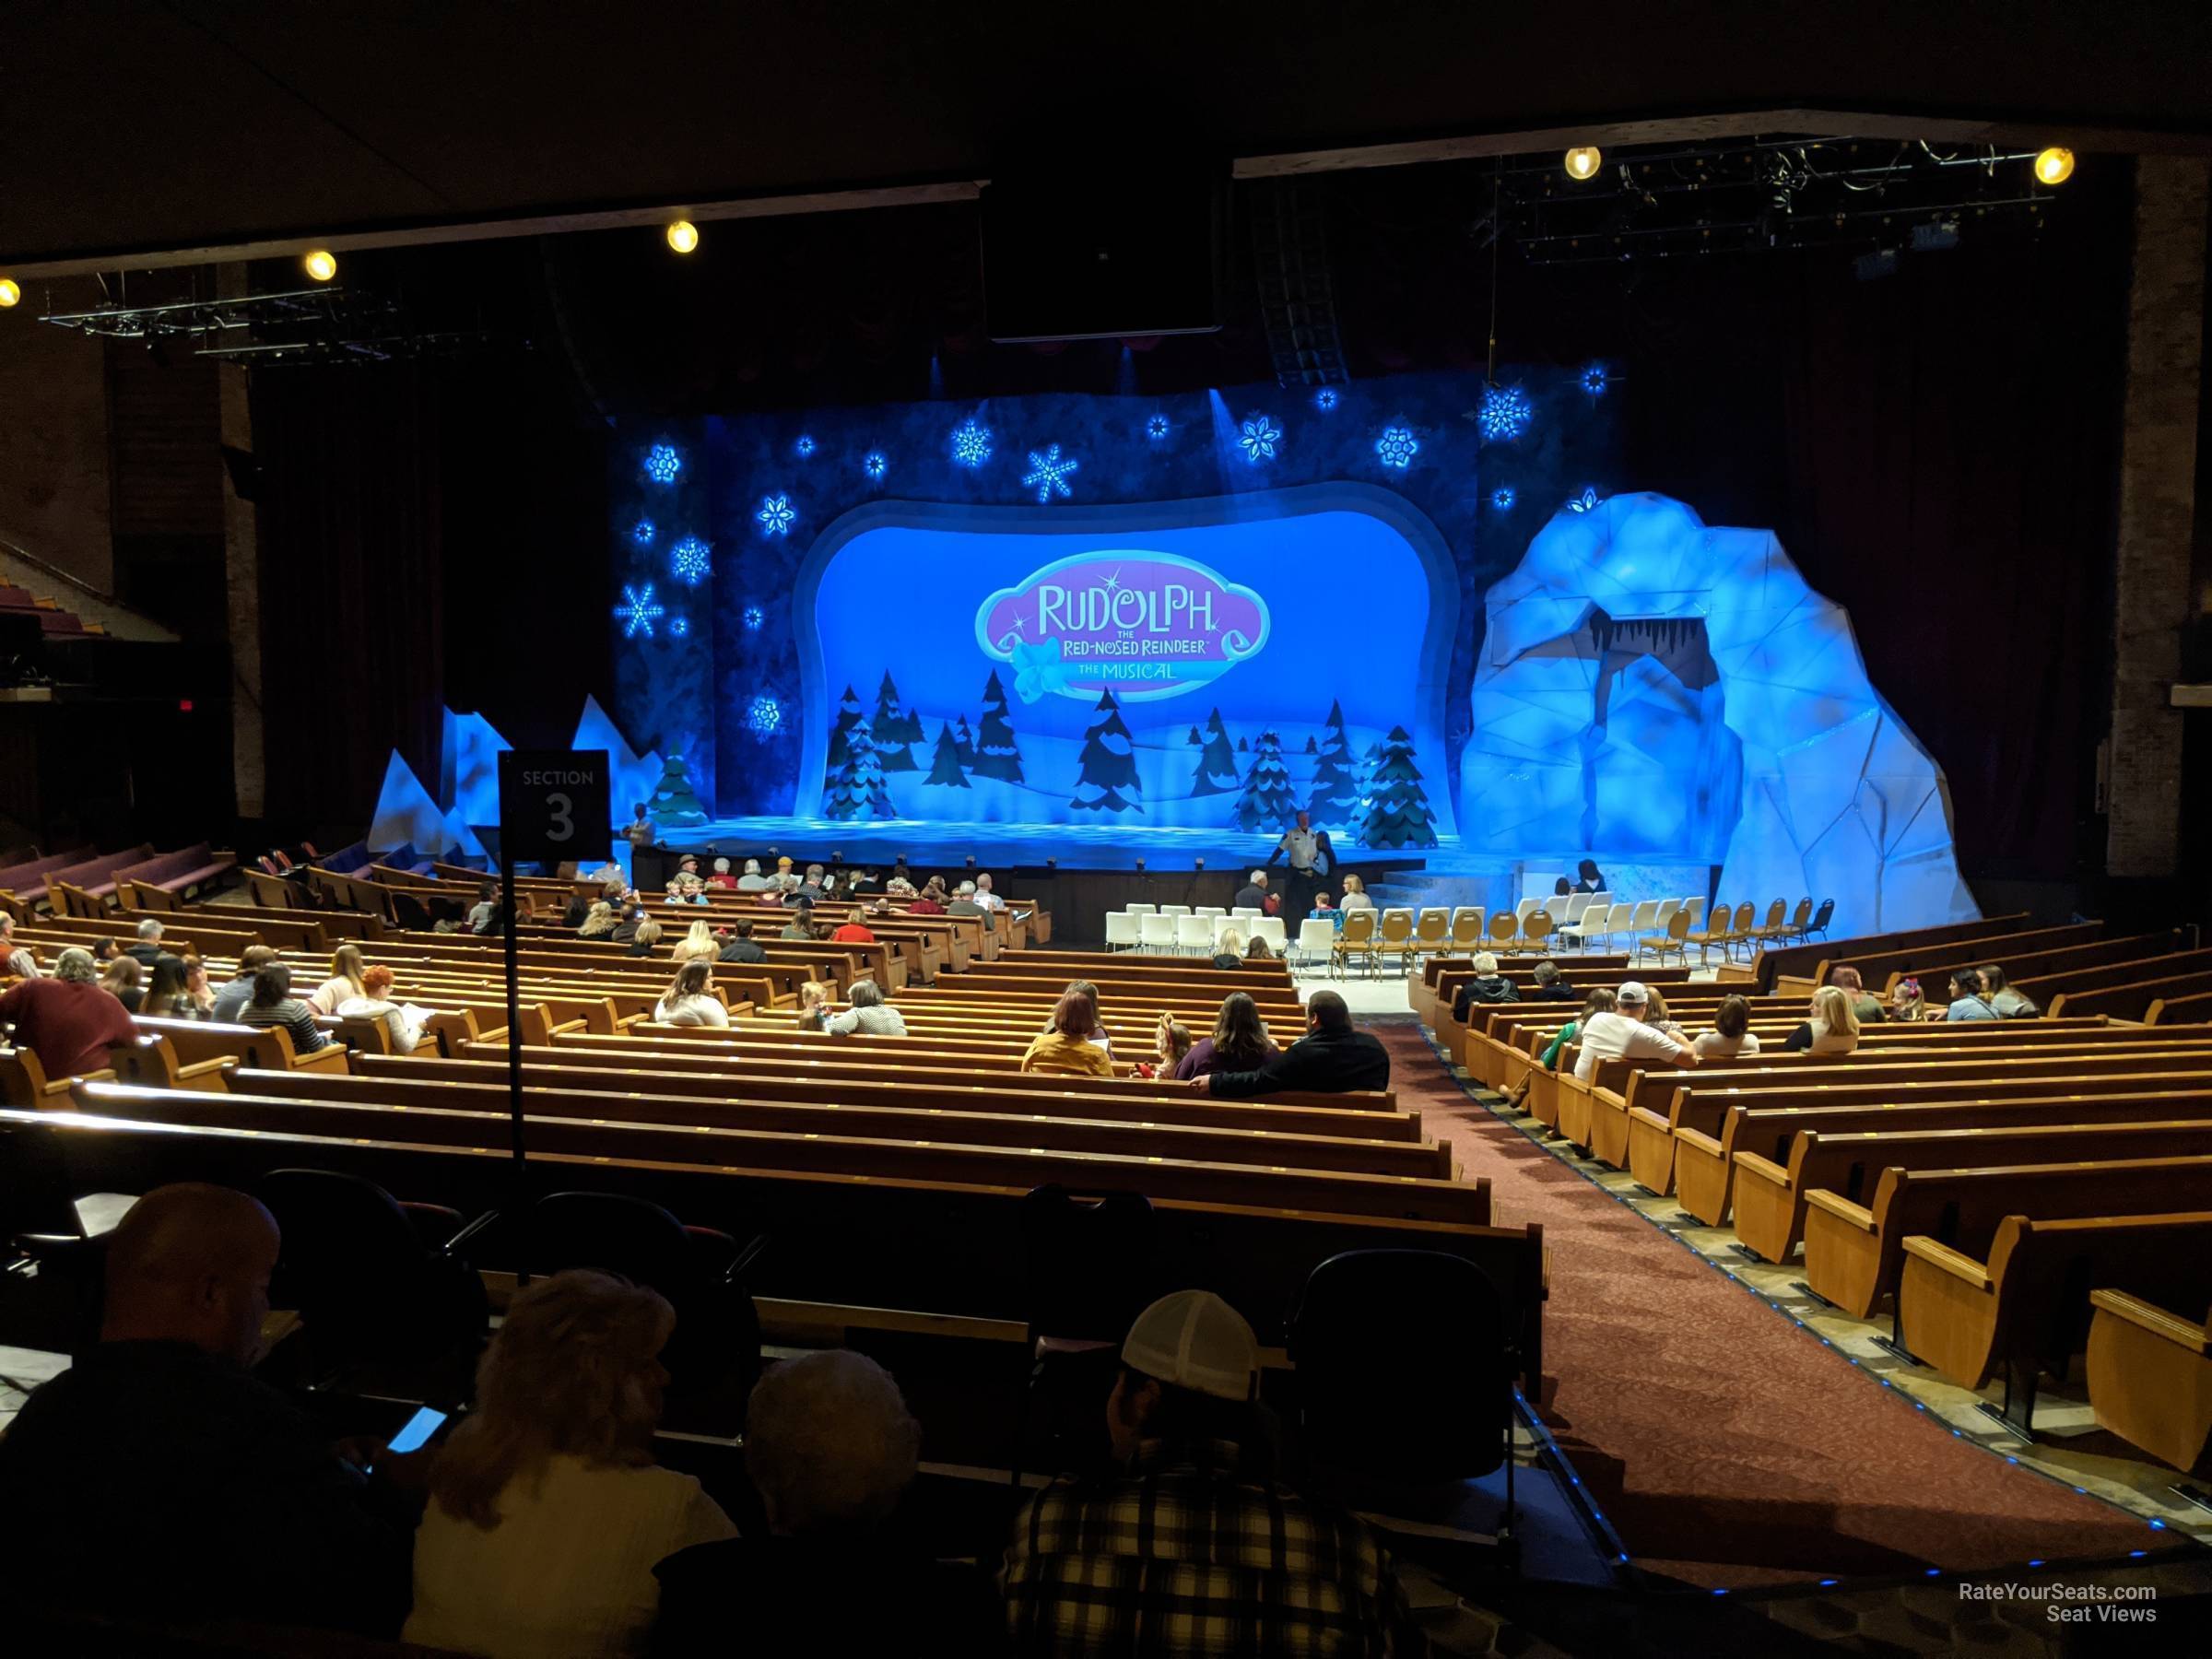 section 11, row v seat view  - grand ole opry house